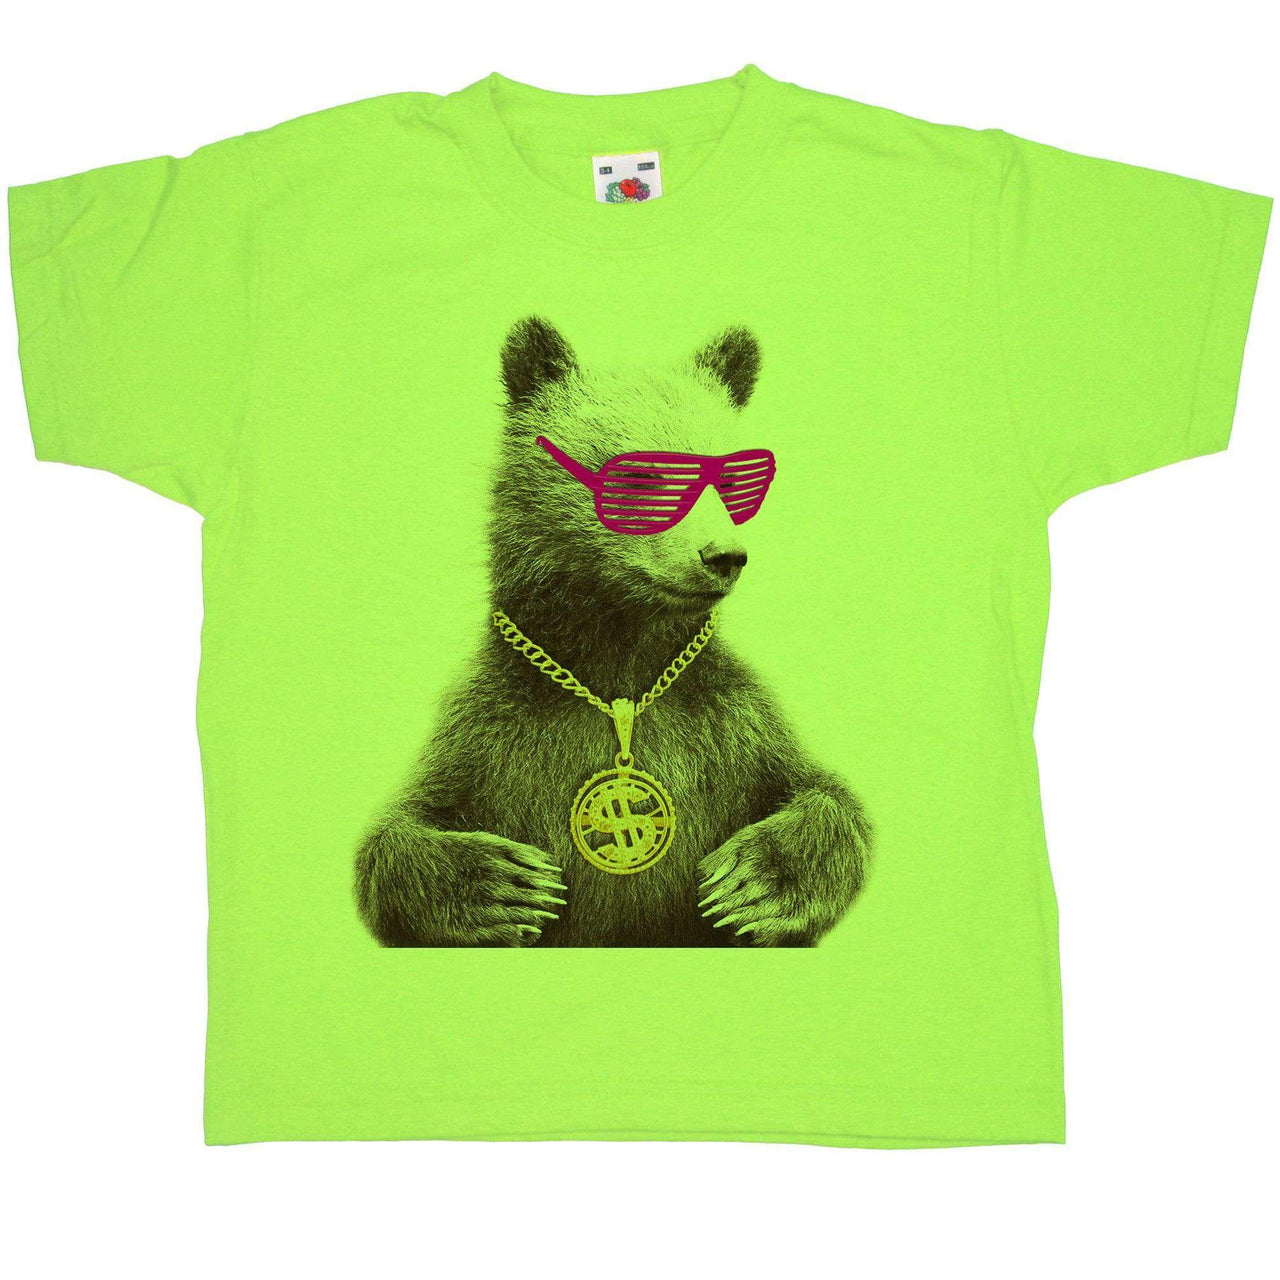 Bling Grizzly Kids T-Shirt 8Ball